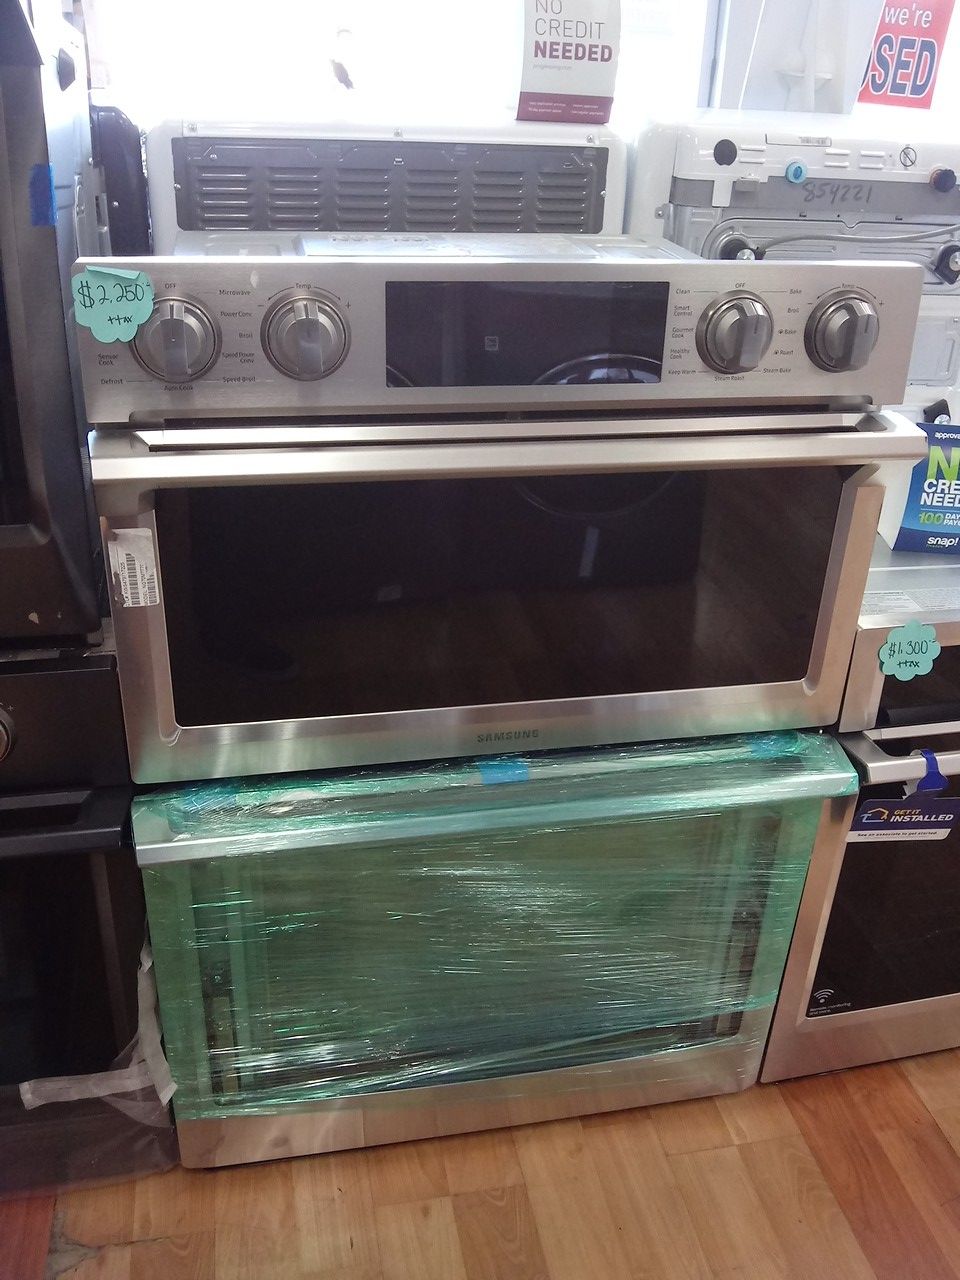 NEW SAMSUNG MICROWAVE OVEN COMBINATION